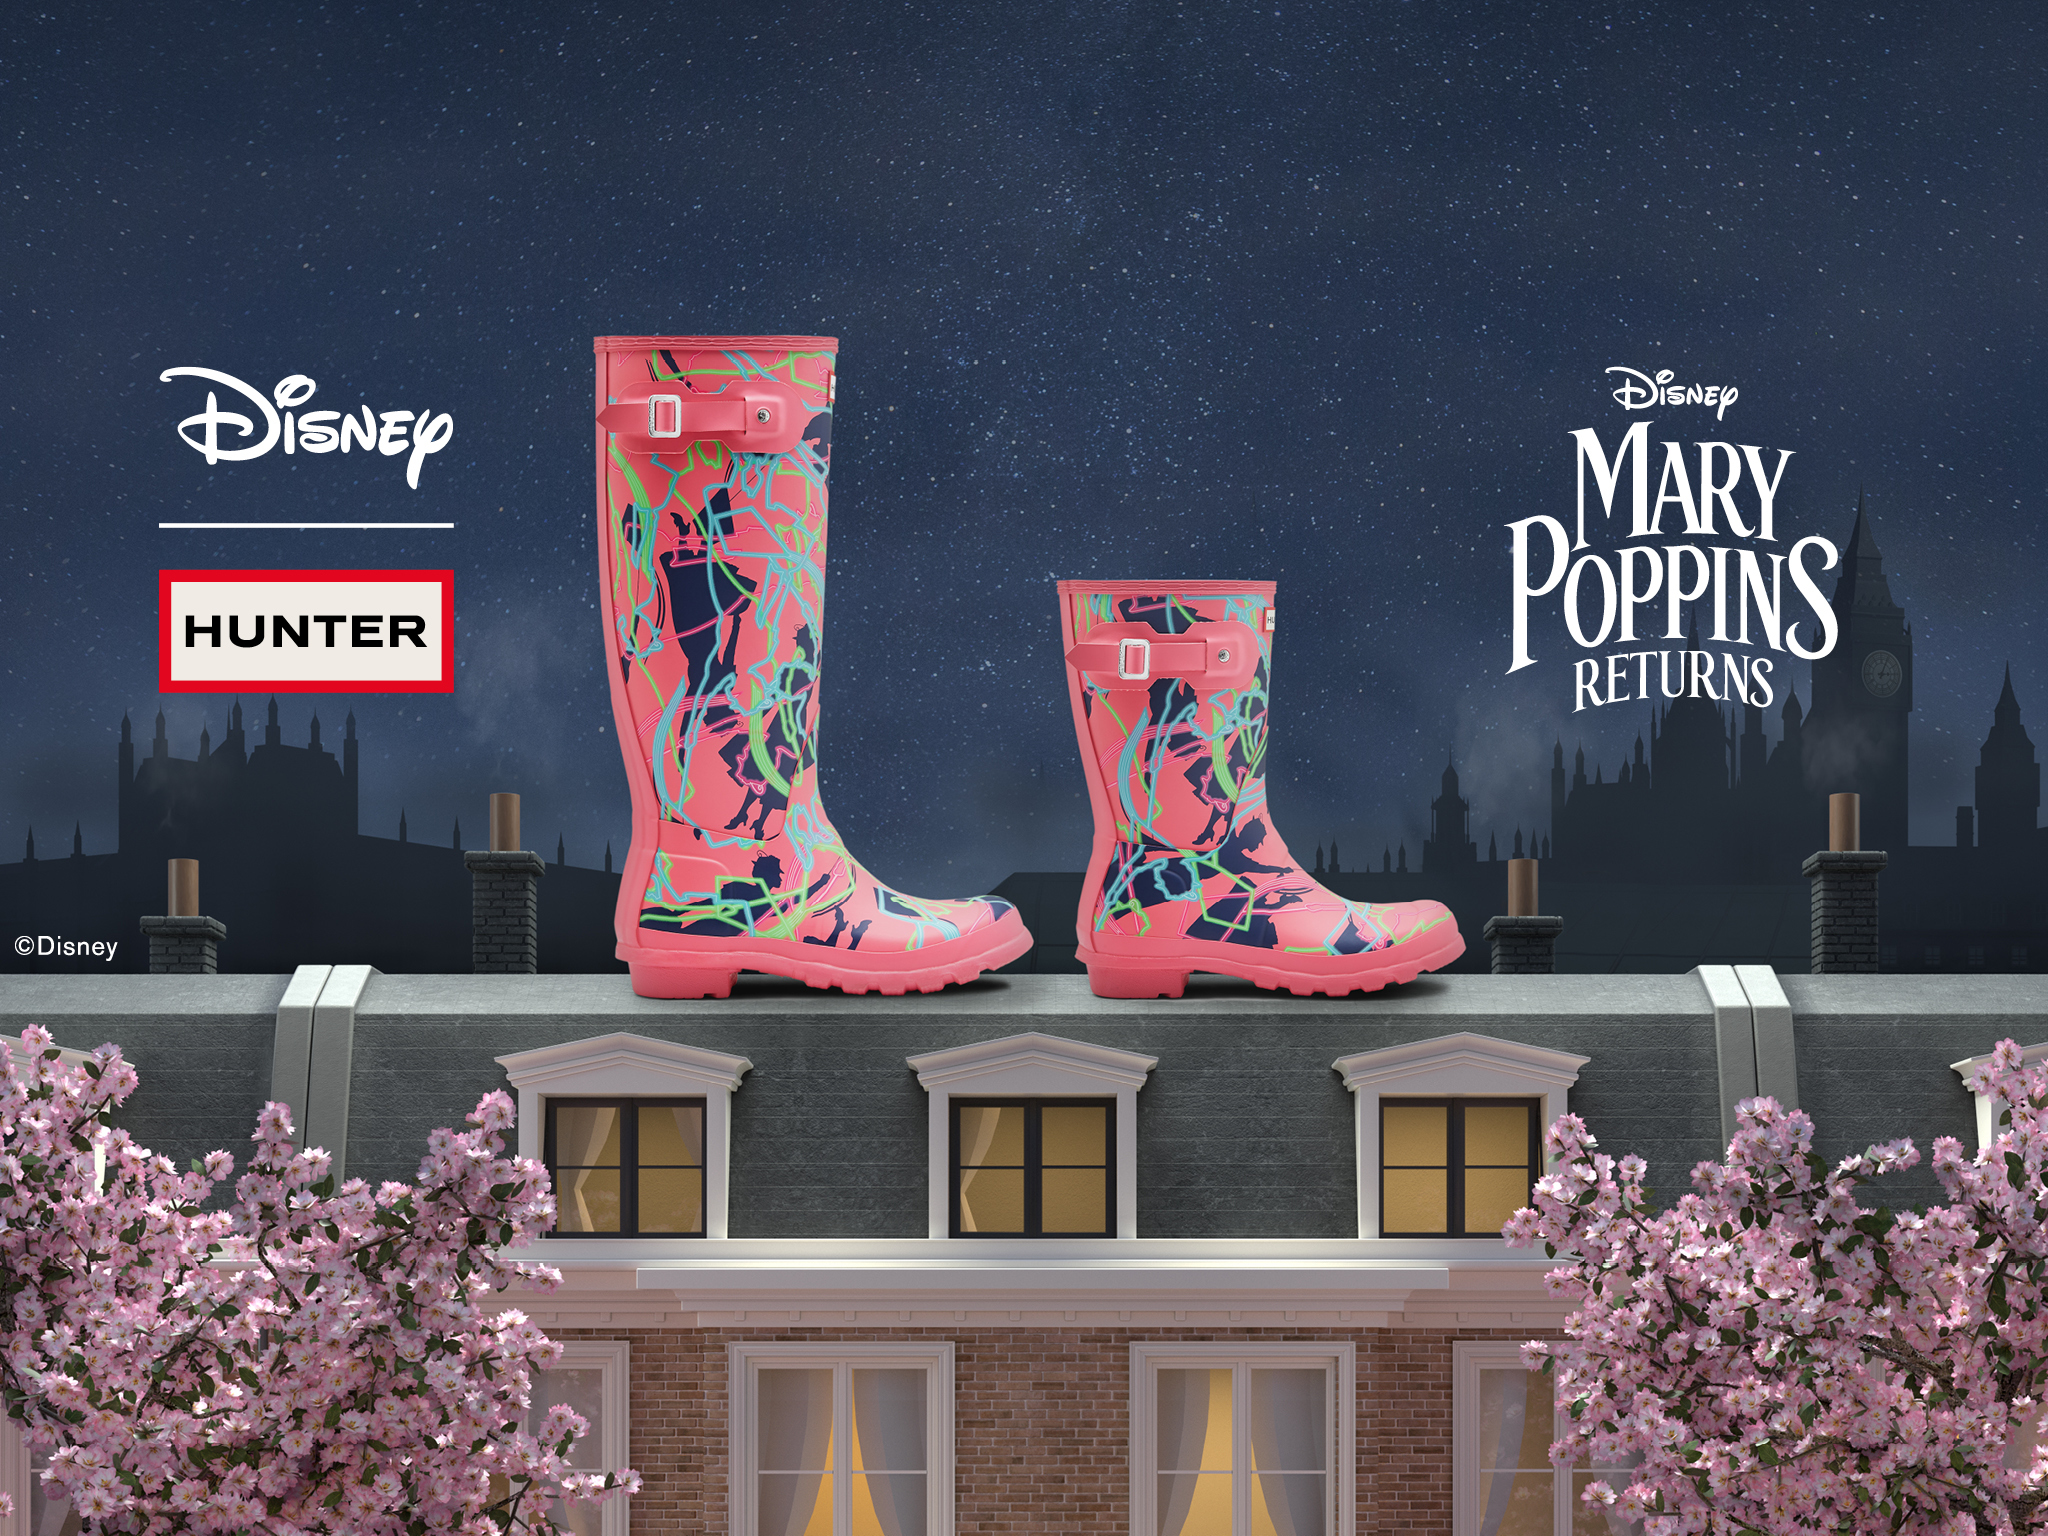 Hunter just dropped a Mary Poppins-inspired Disney collab